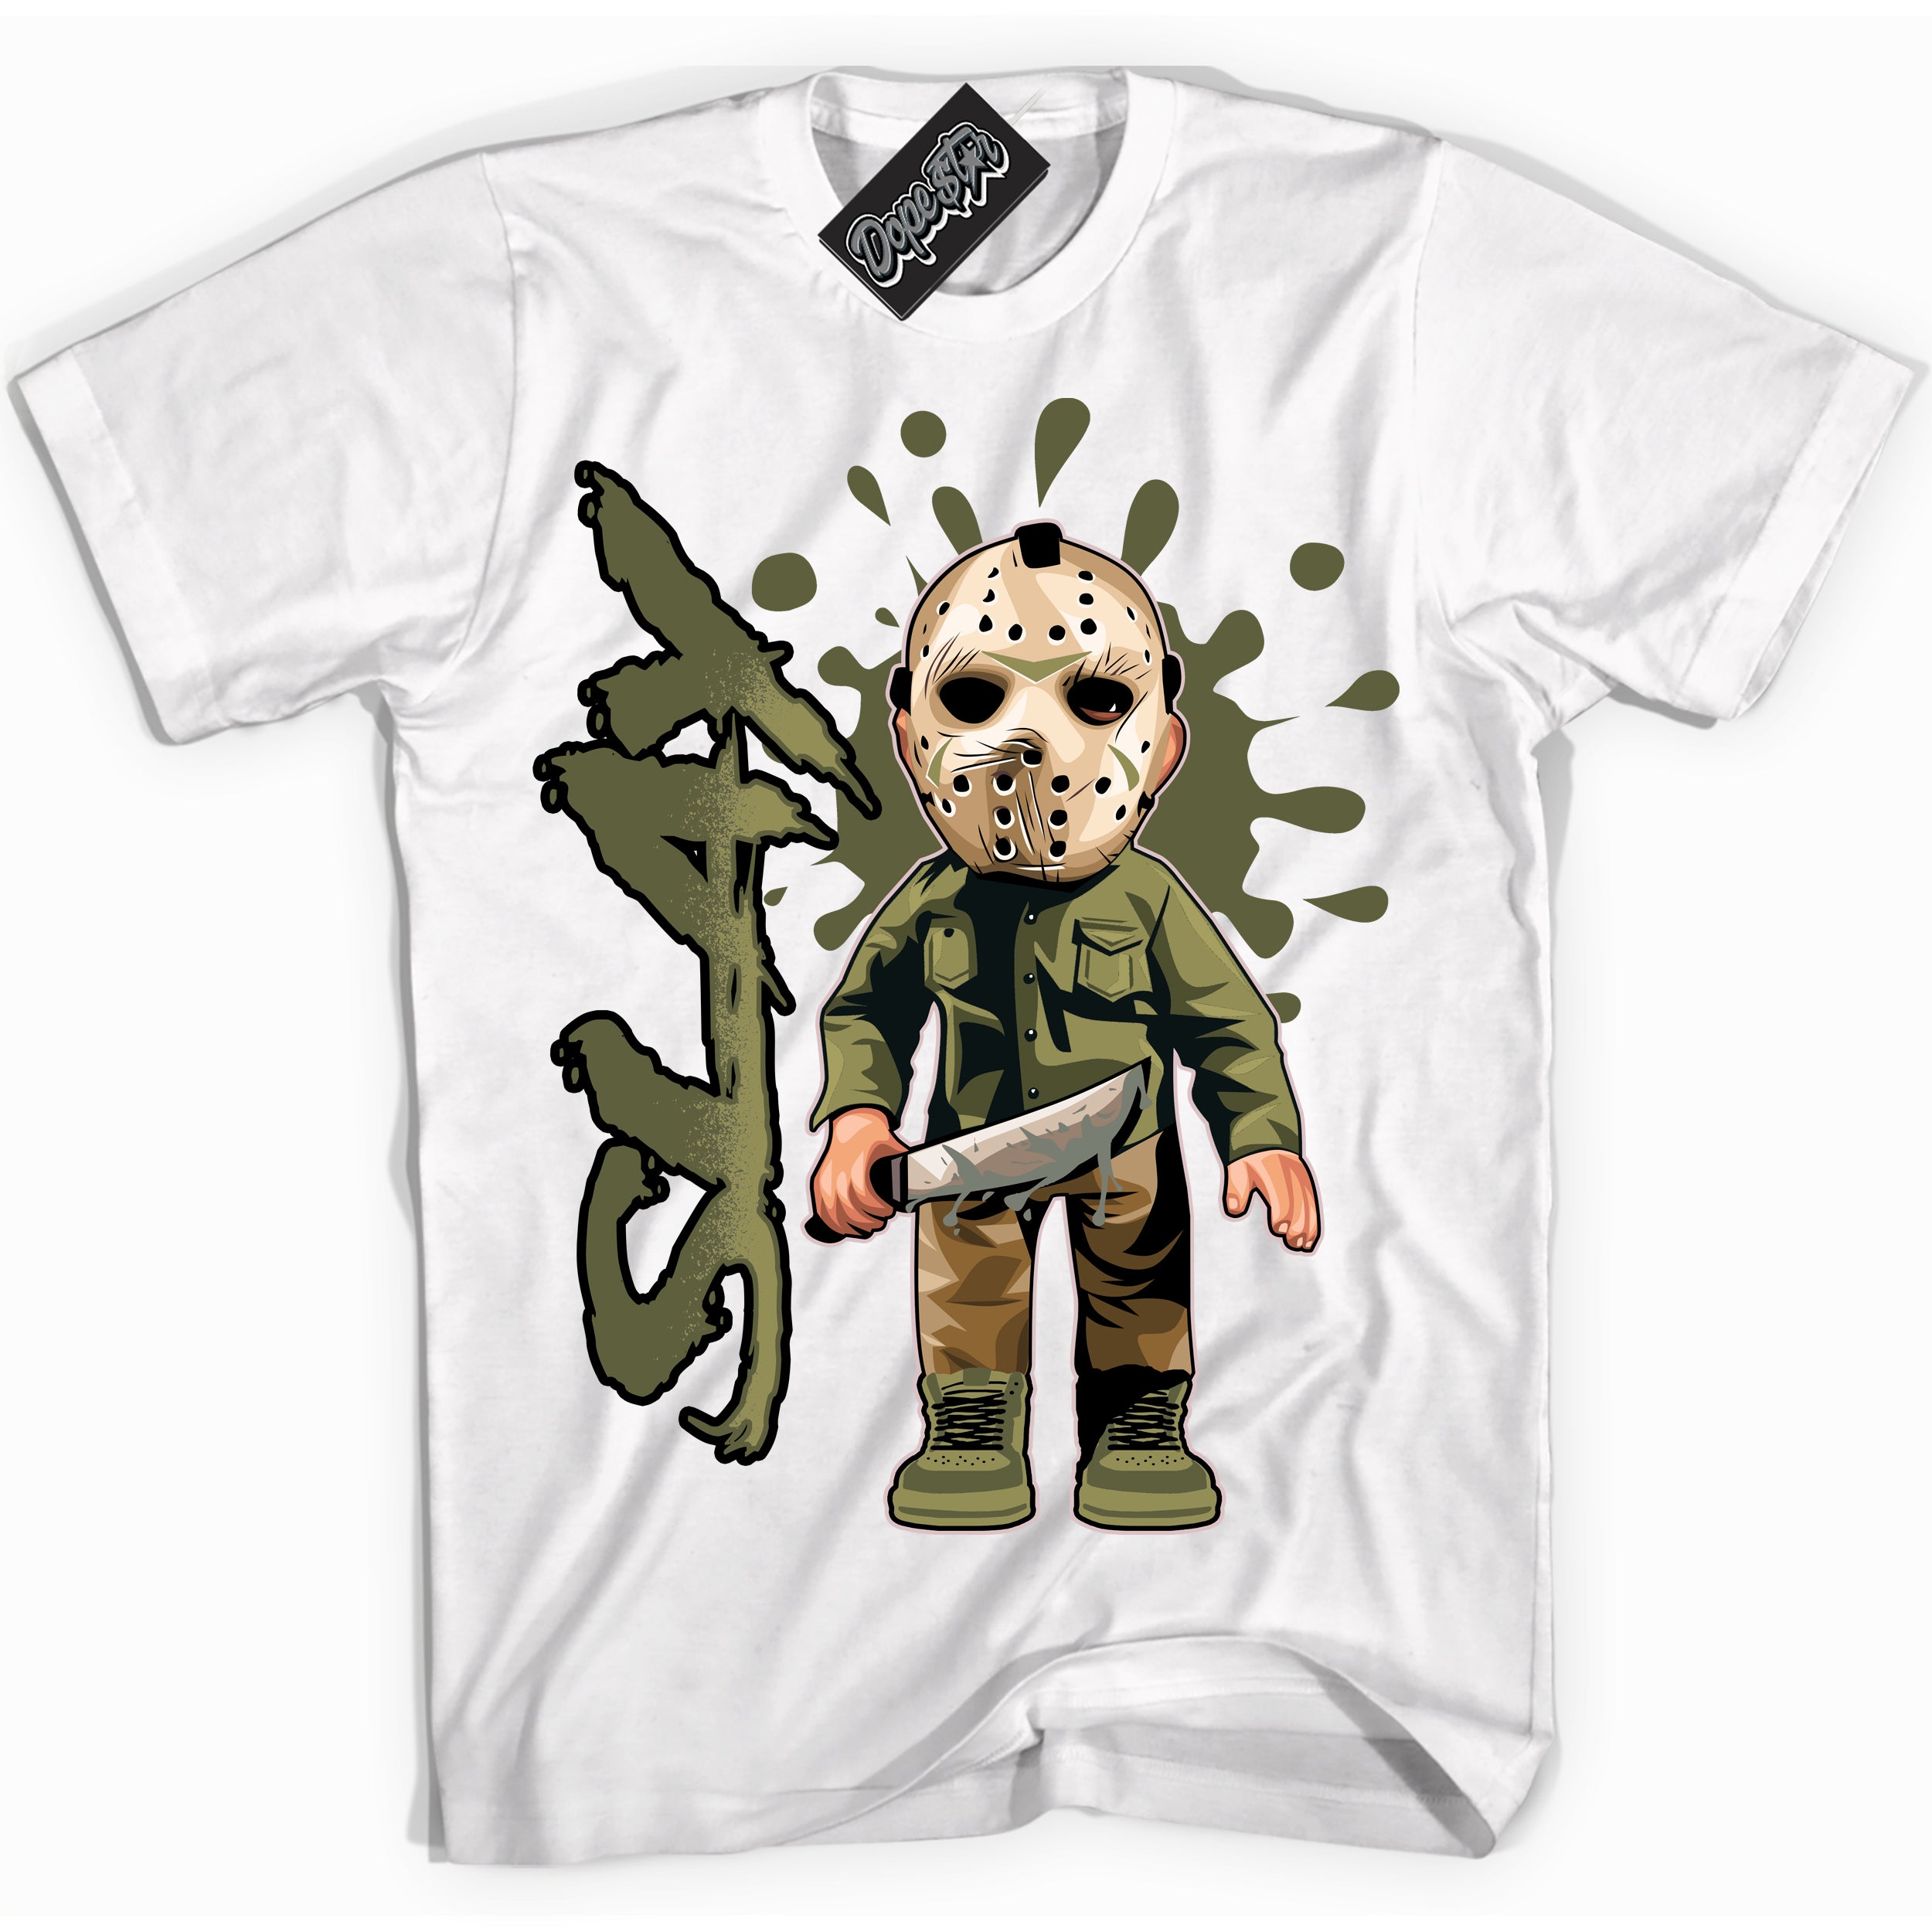 Cool White graphic tee with “ SLAY ” print, that perfectly matches Craft Olive 4s sneakers 